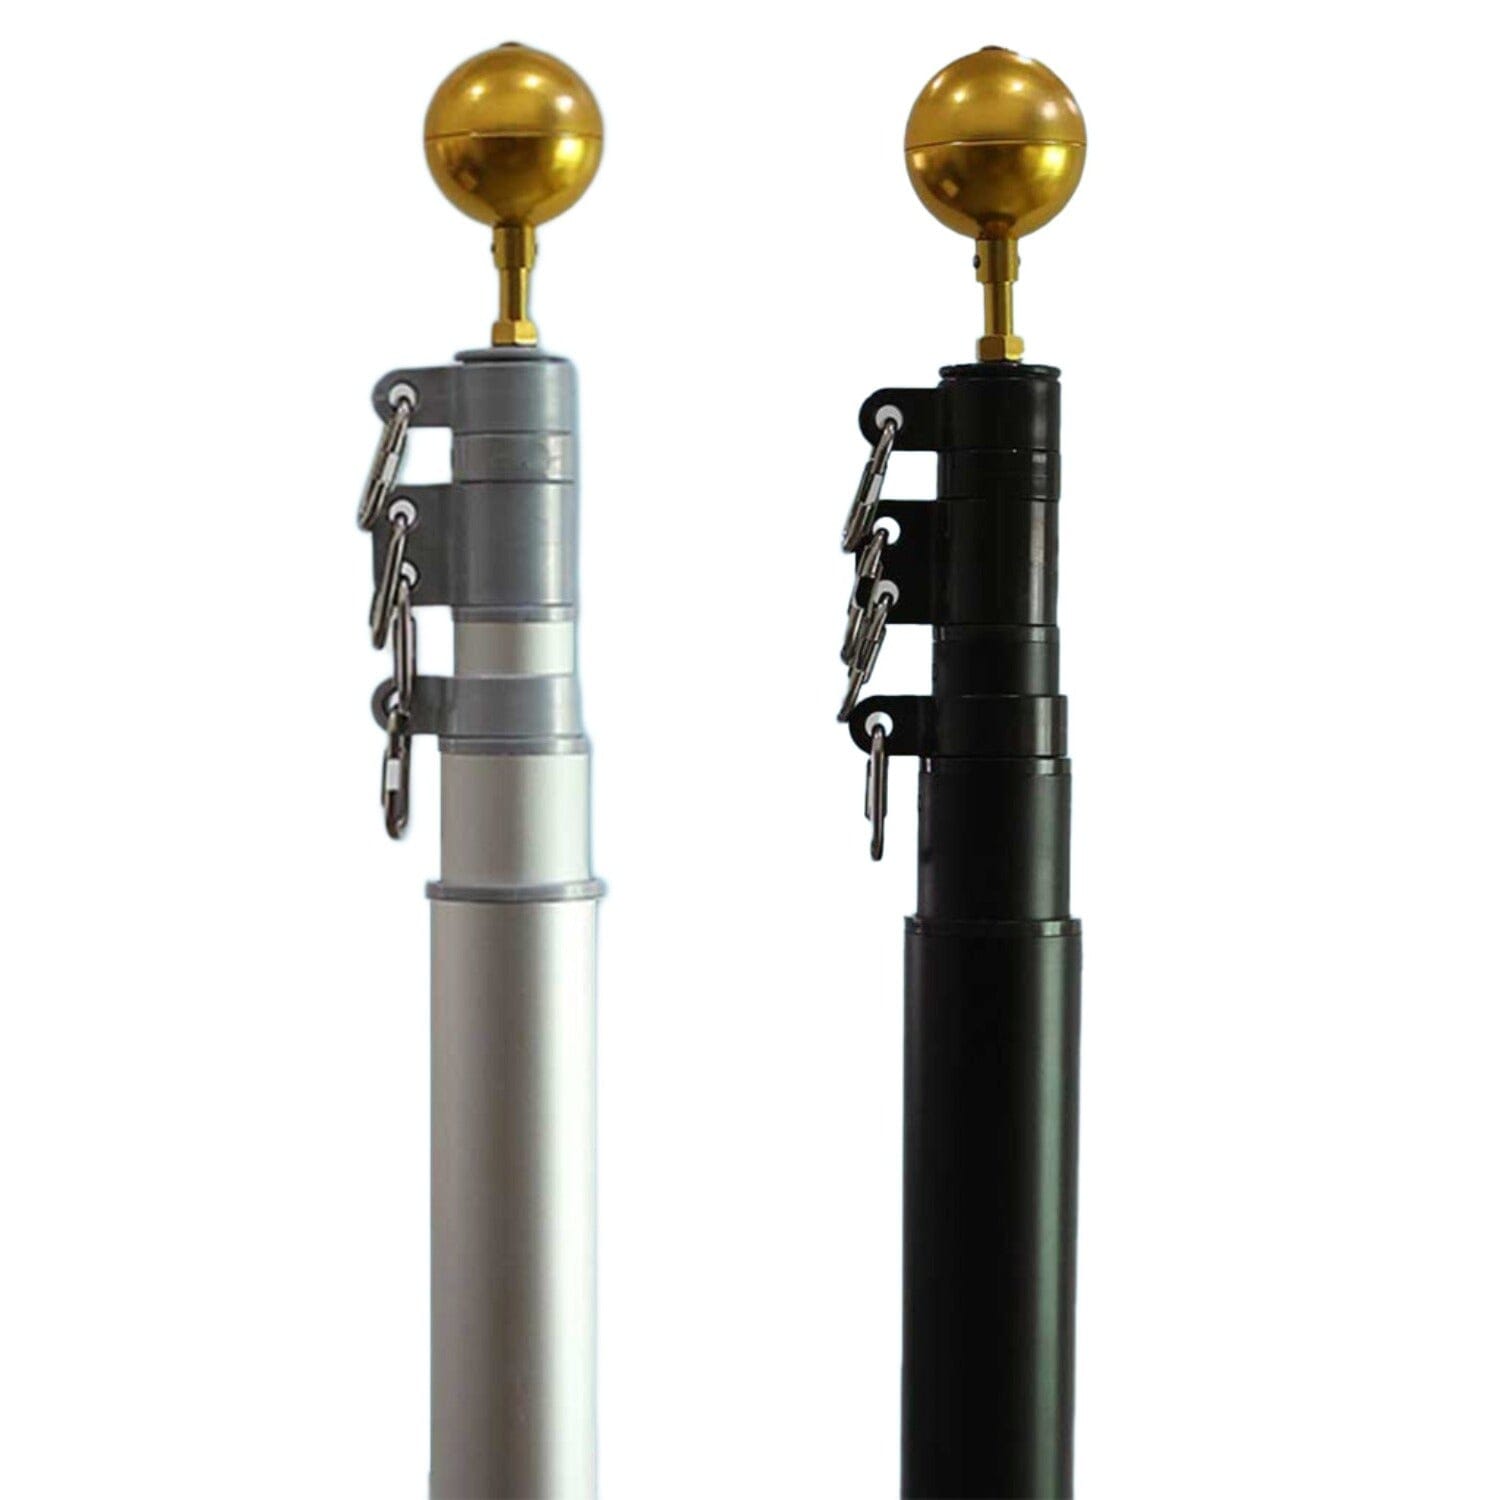 Color Variants of the Heavy Duty - Made in America -  American Standard Telescoping Flagpole